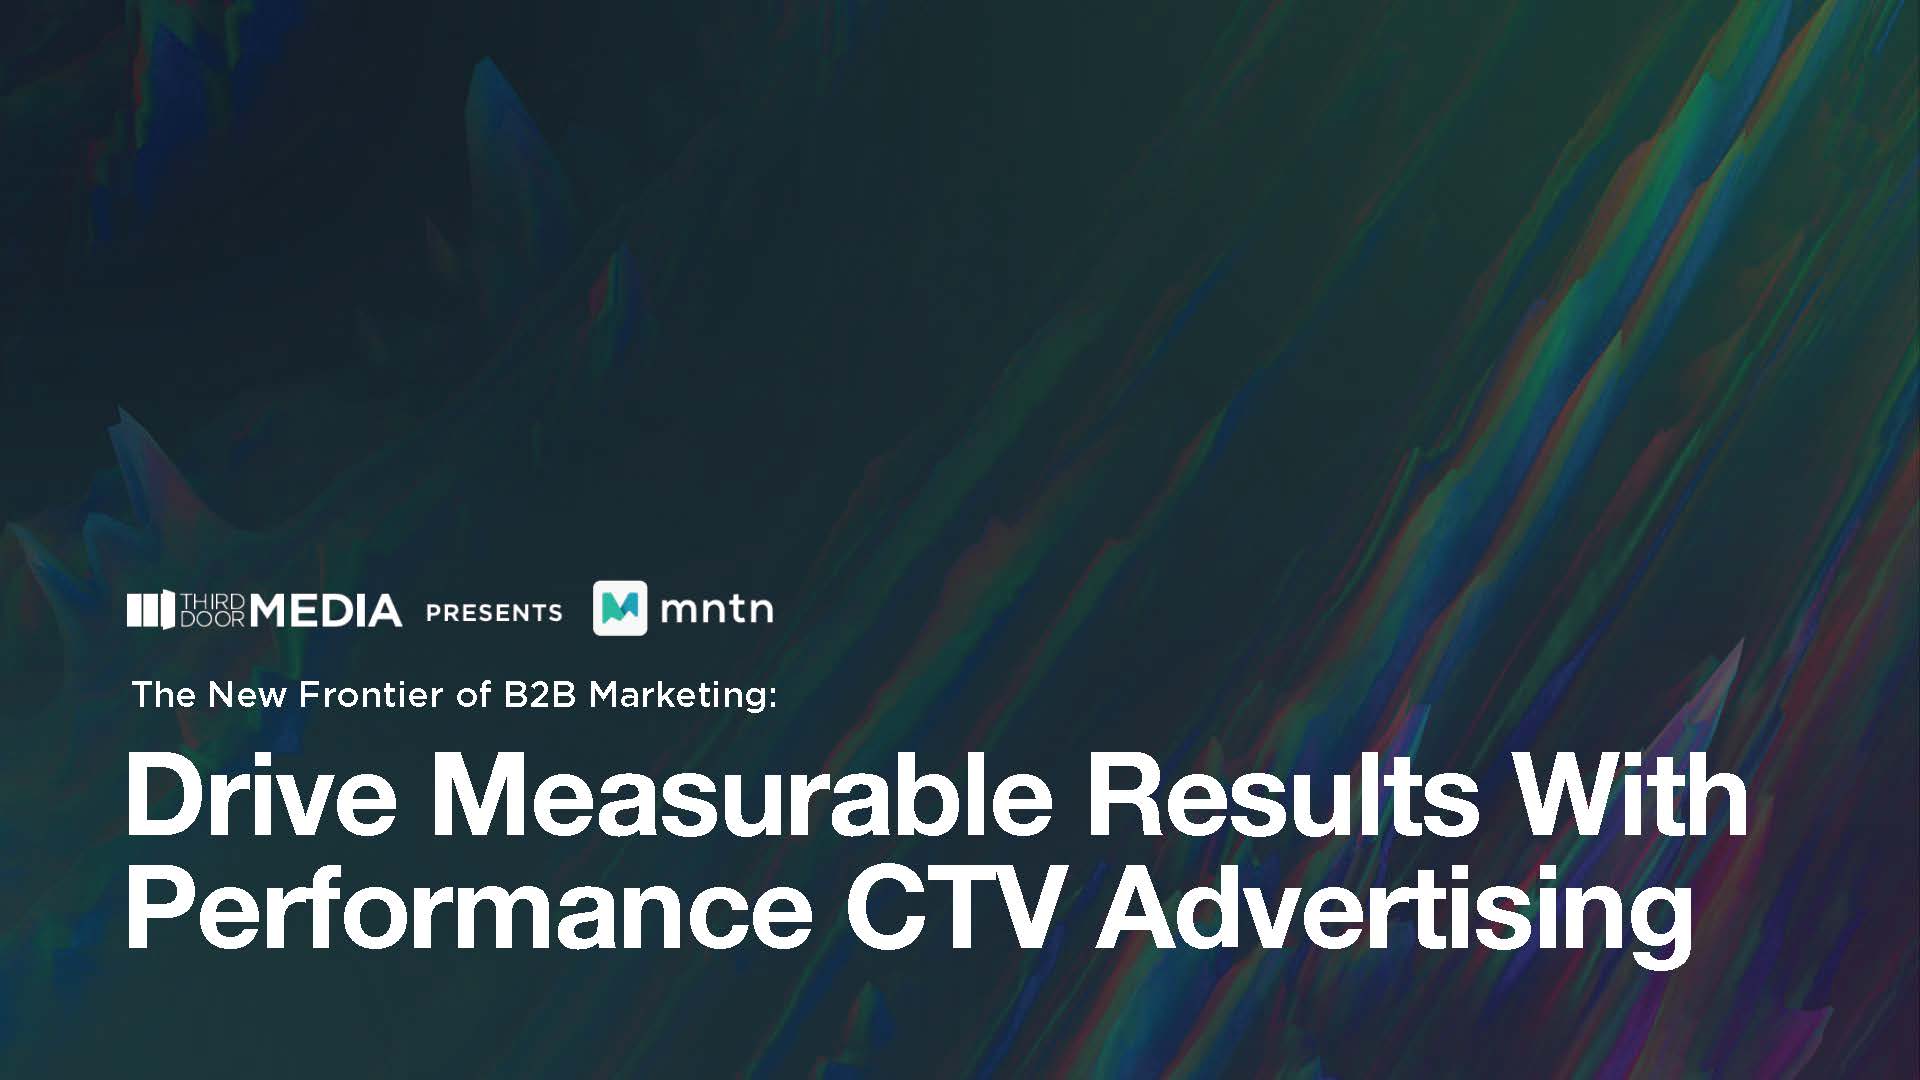 The New Frontier of B2B Marketing: Drive Measurable Results With Performance CTV Advertising